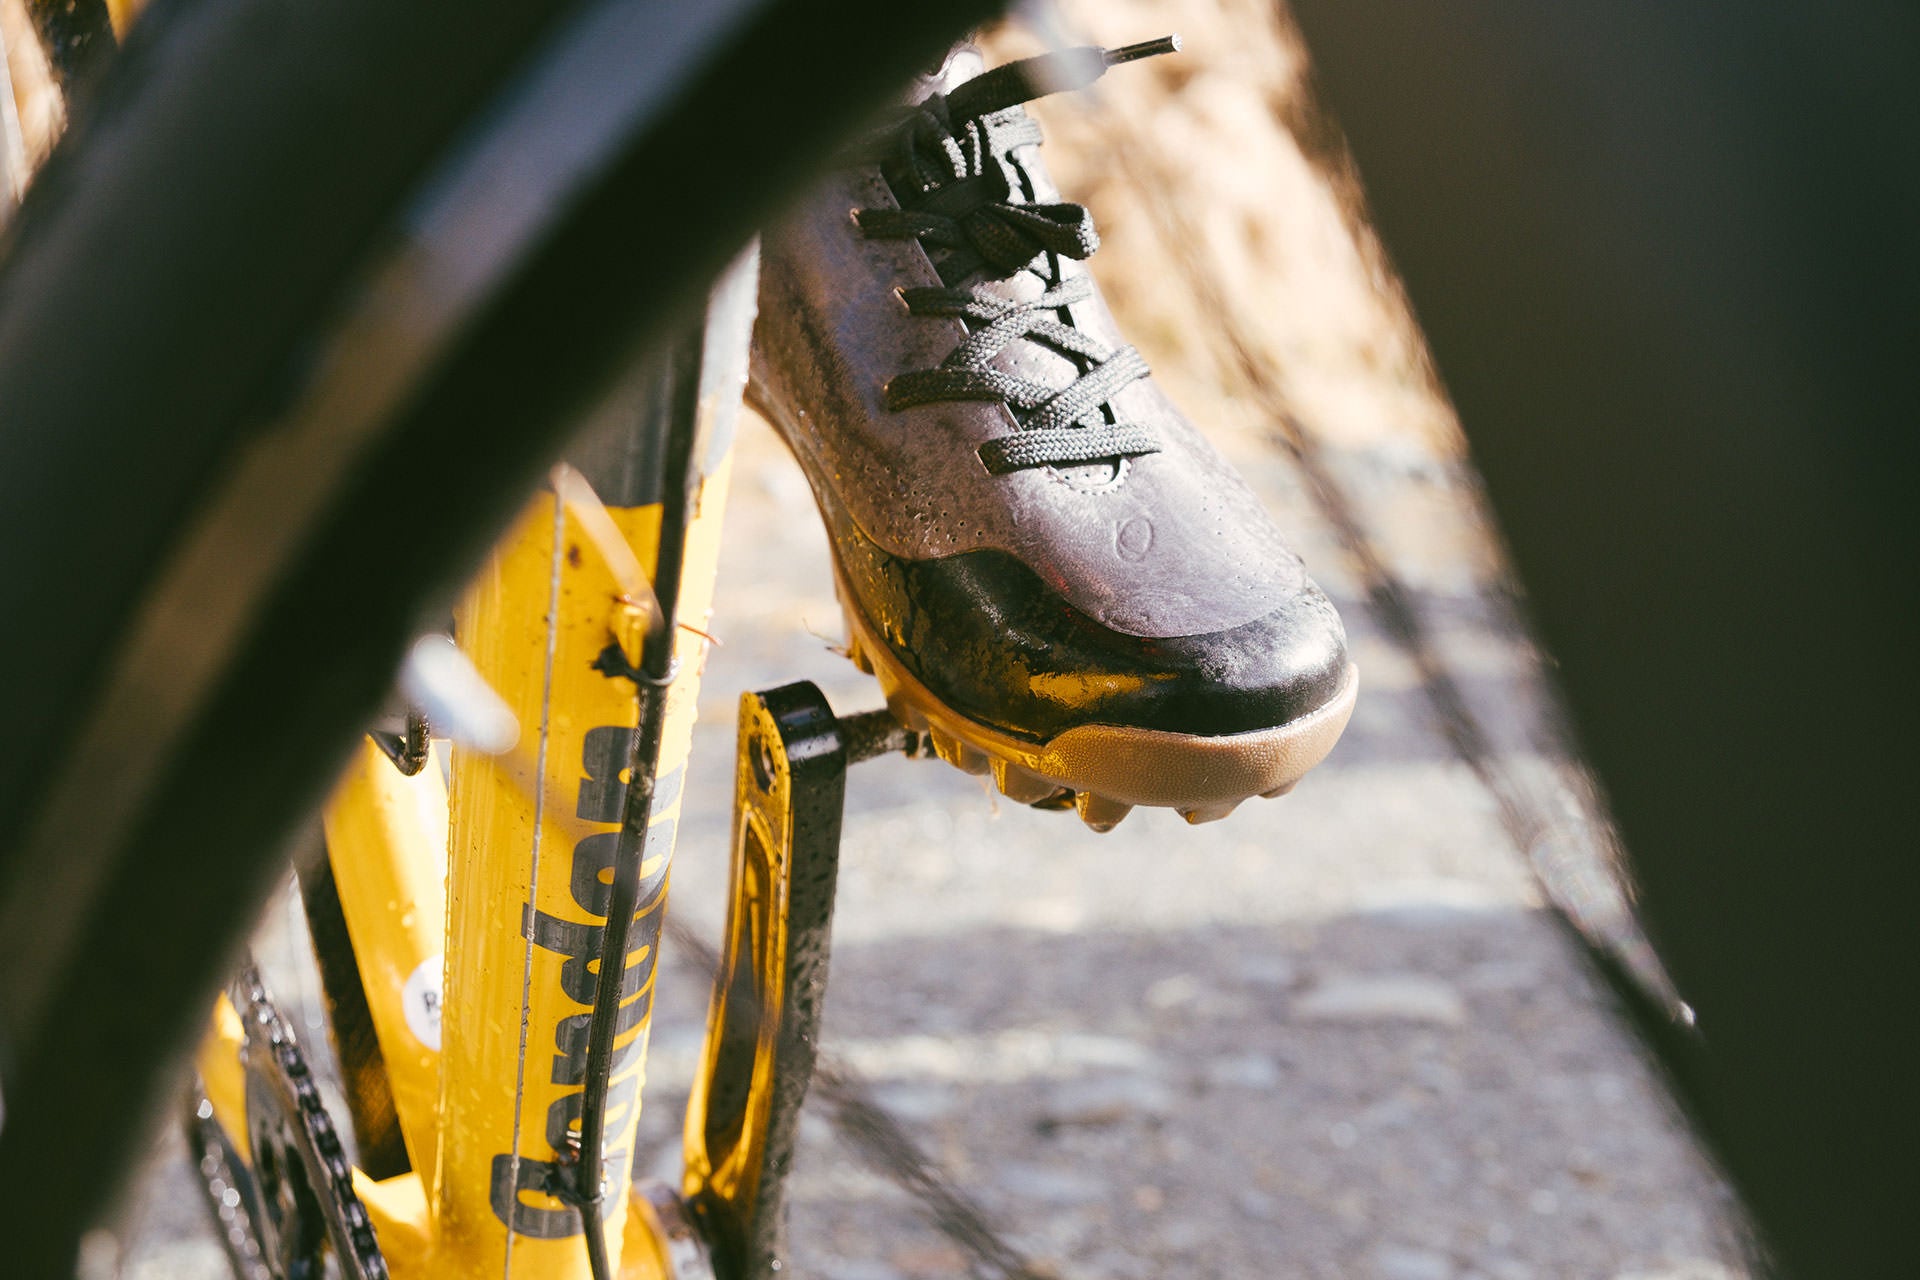 lace up cycling shoes spd